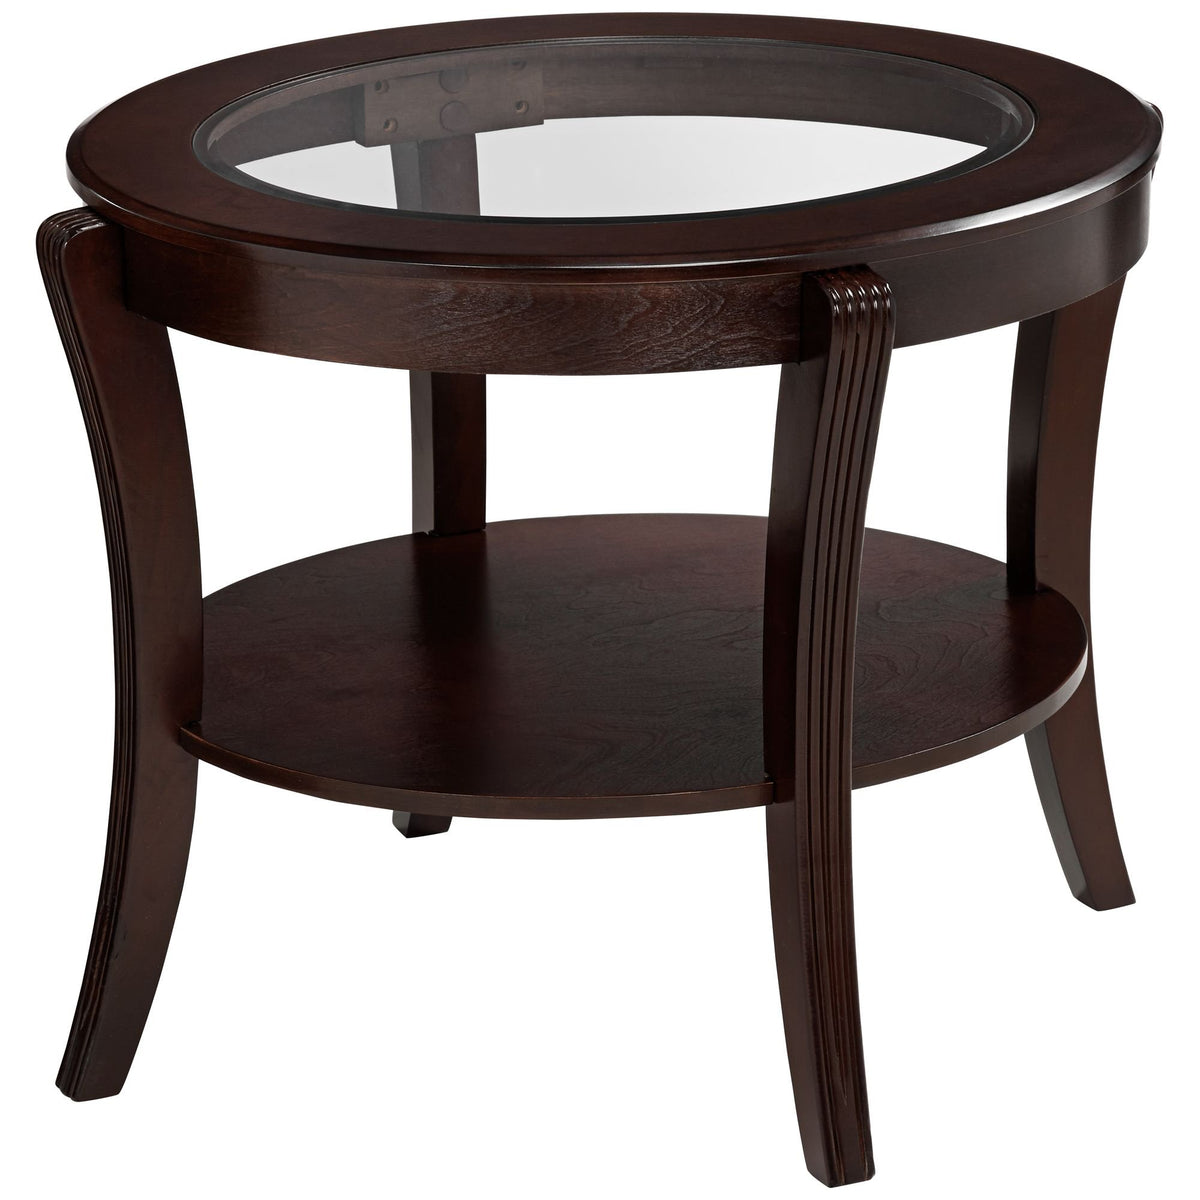 Oval Top Wooden End Table with Glass Insert and Open Shelf, Espresso Brown - BM219904